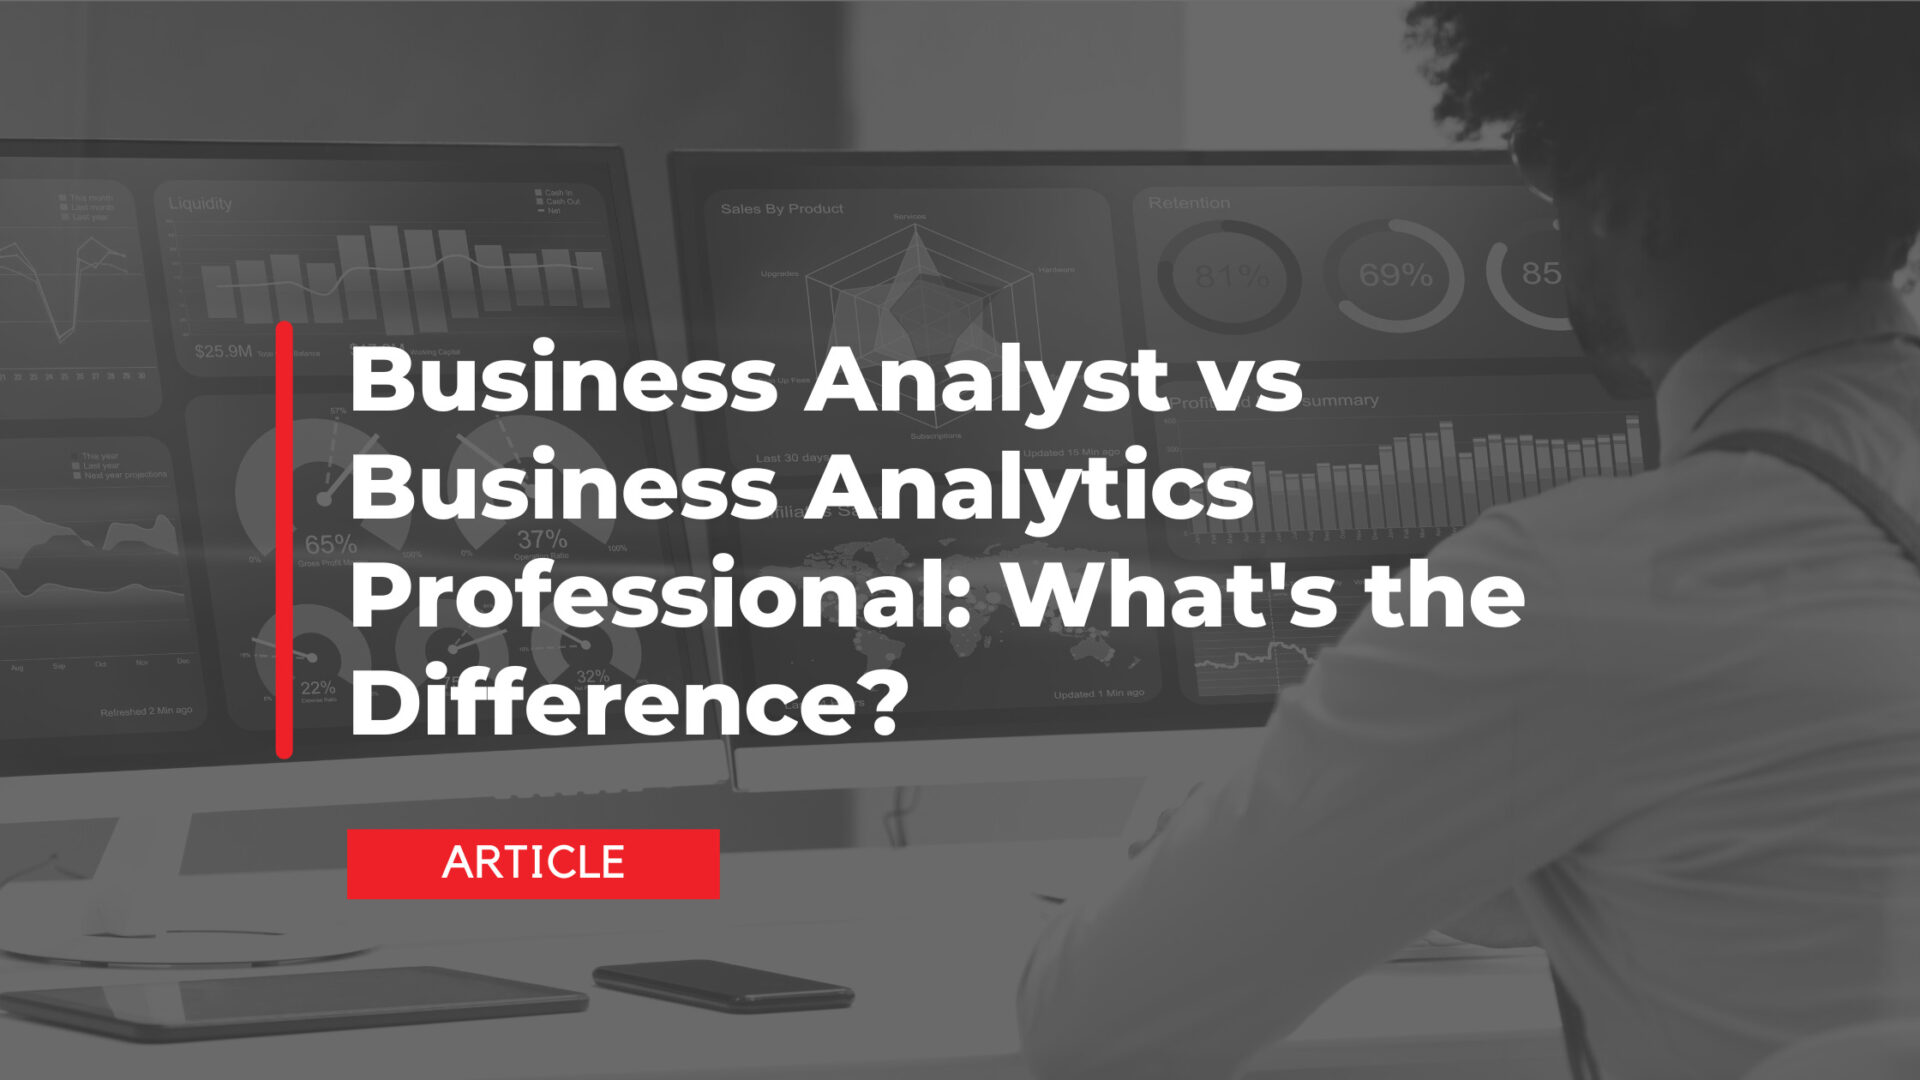 Business Analyst vs Business Analytics Professional: What’s the Difference?